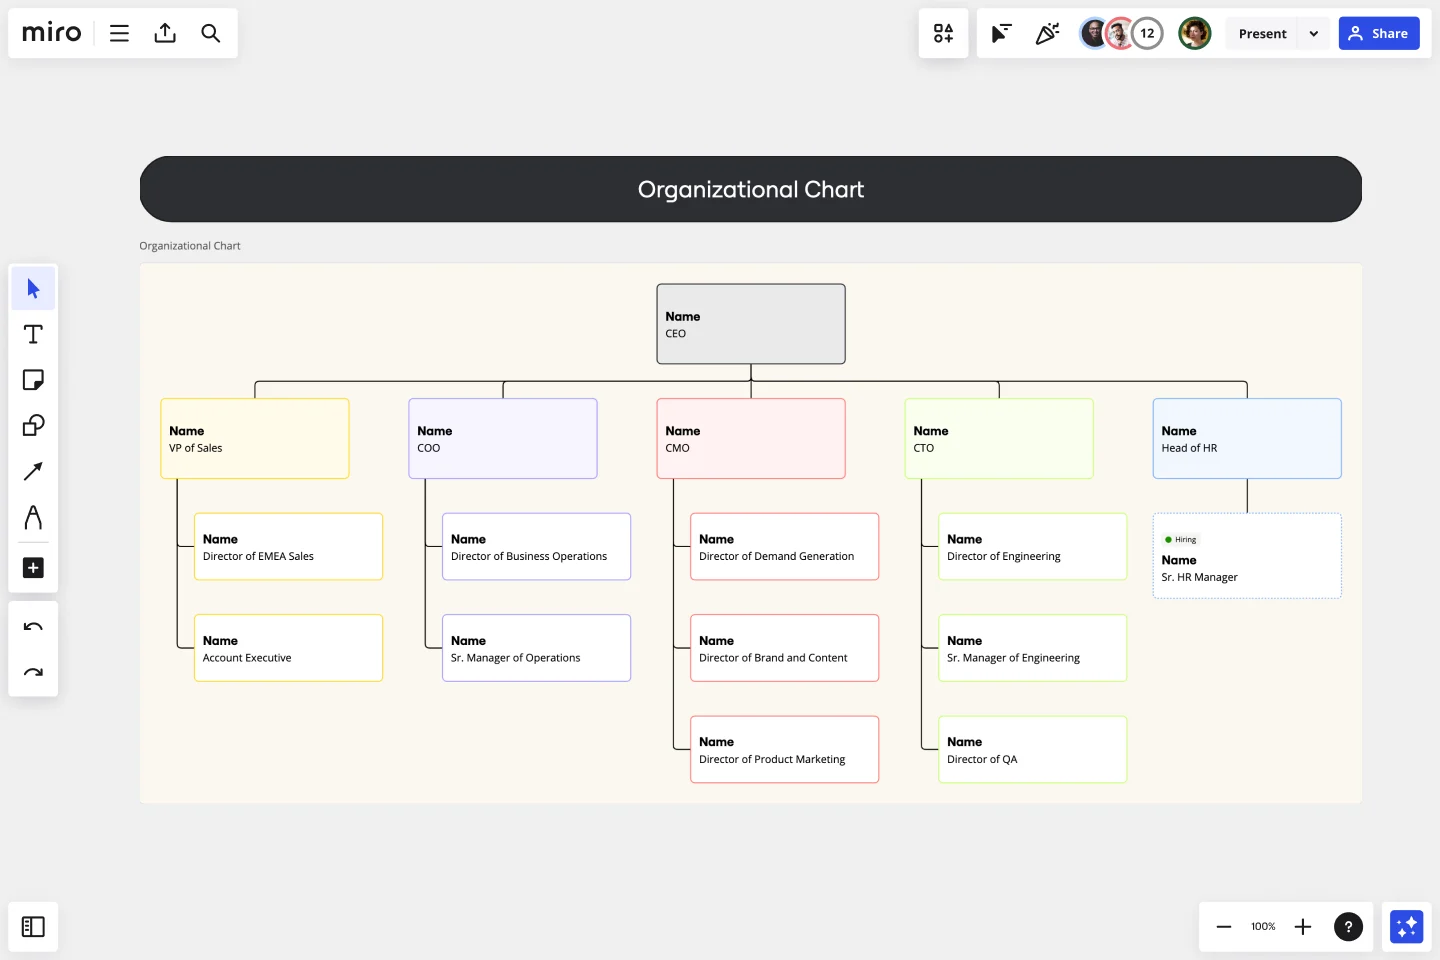 Organizational Chart Template & Example for Teams | Miro